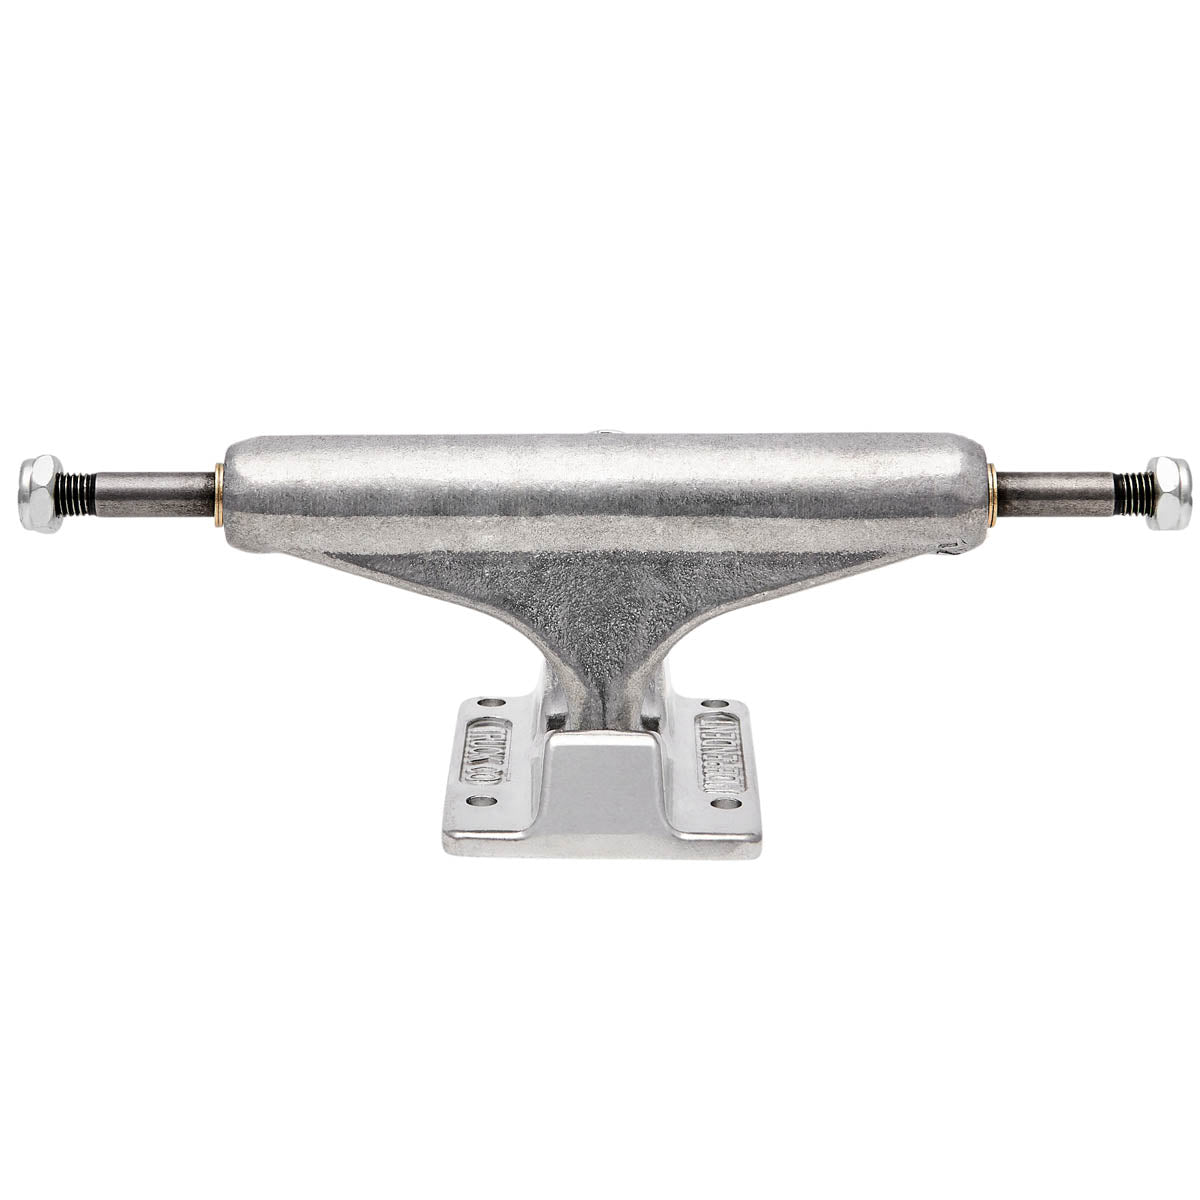 Independent Stage 11 Forged Hollow Skateboard Trucks - Silver image 3